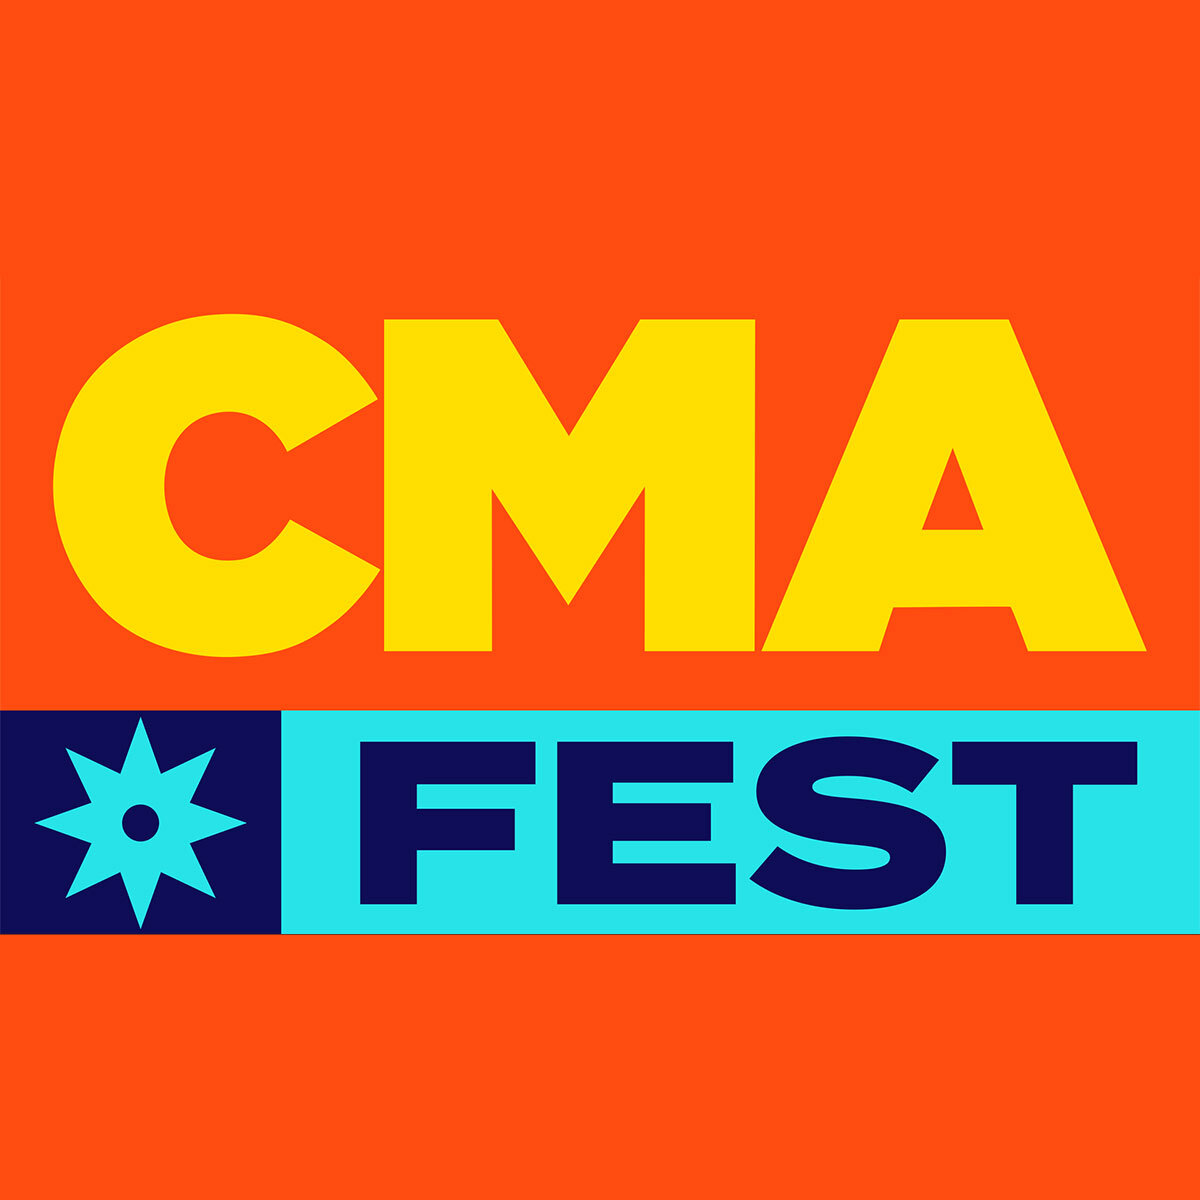 TUNE IN TO SEE JASON ALDEAN PERFORM ON THE CMA FEST PRIMETIME SPECIAL